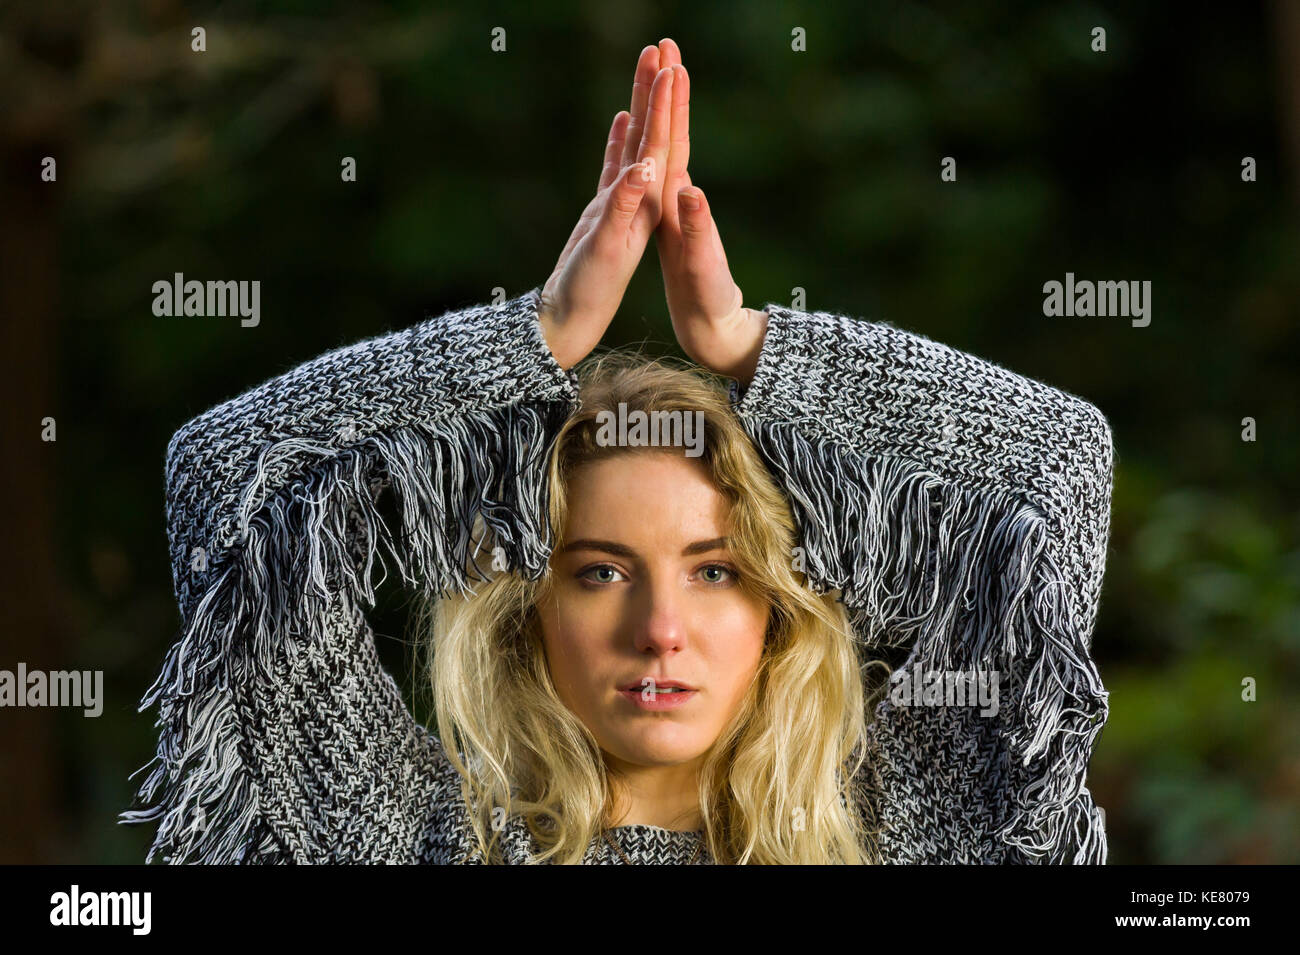 Girl looks directly into the camera, holding her arms above her head, back of hands together, in a head and shoulders pose. Stock Photo